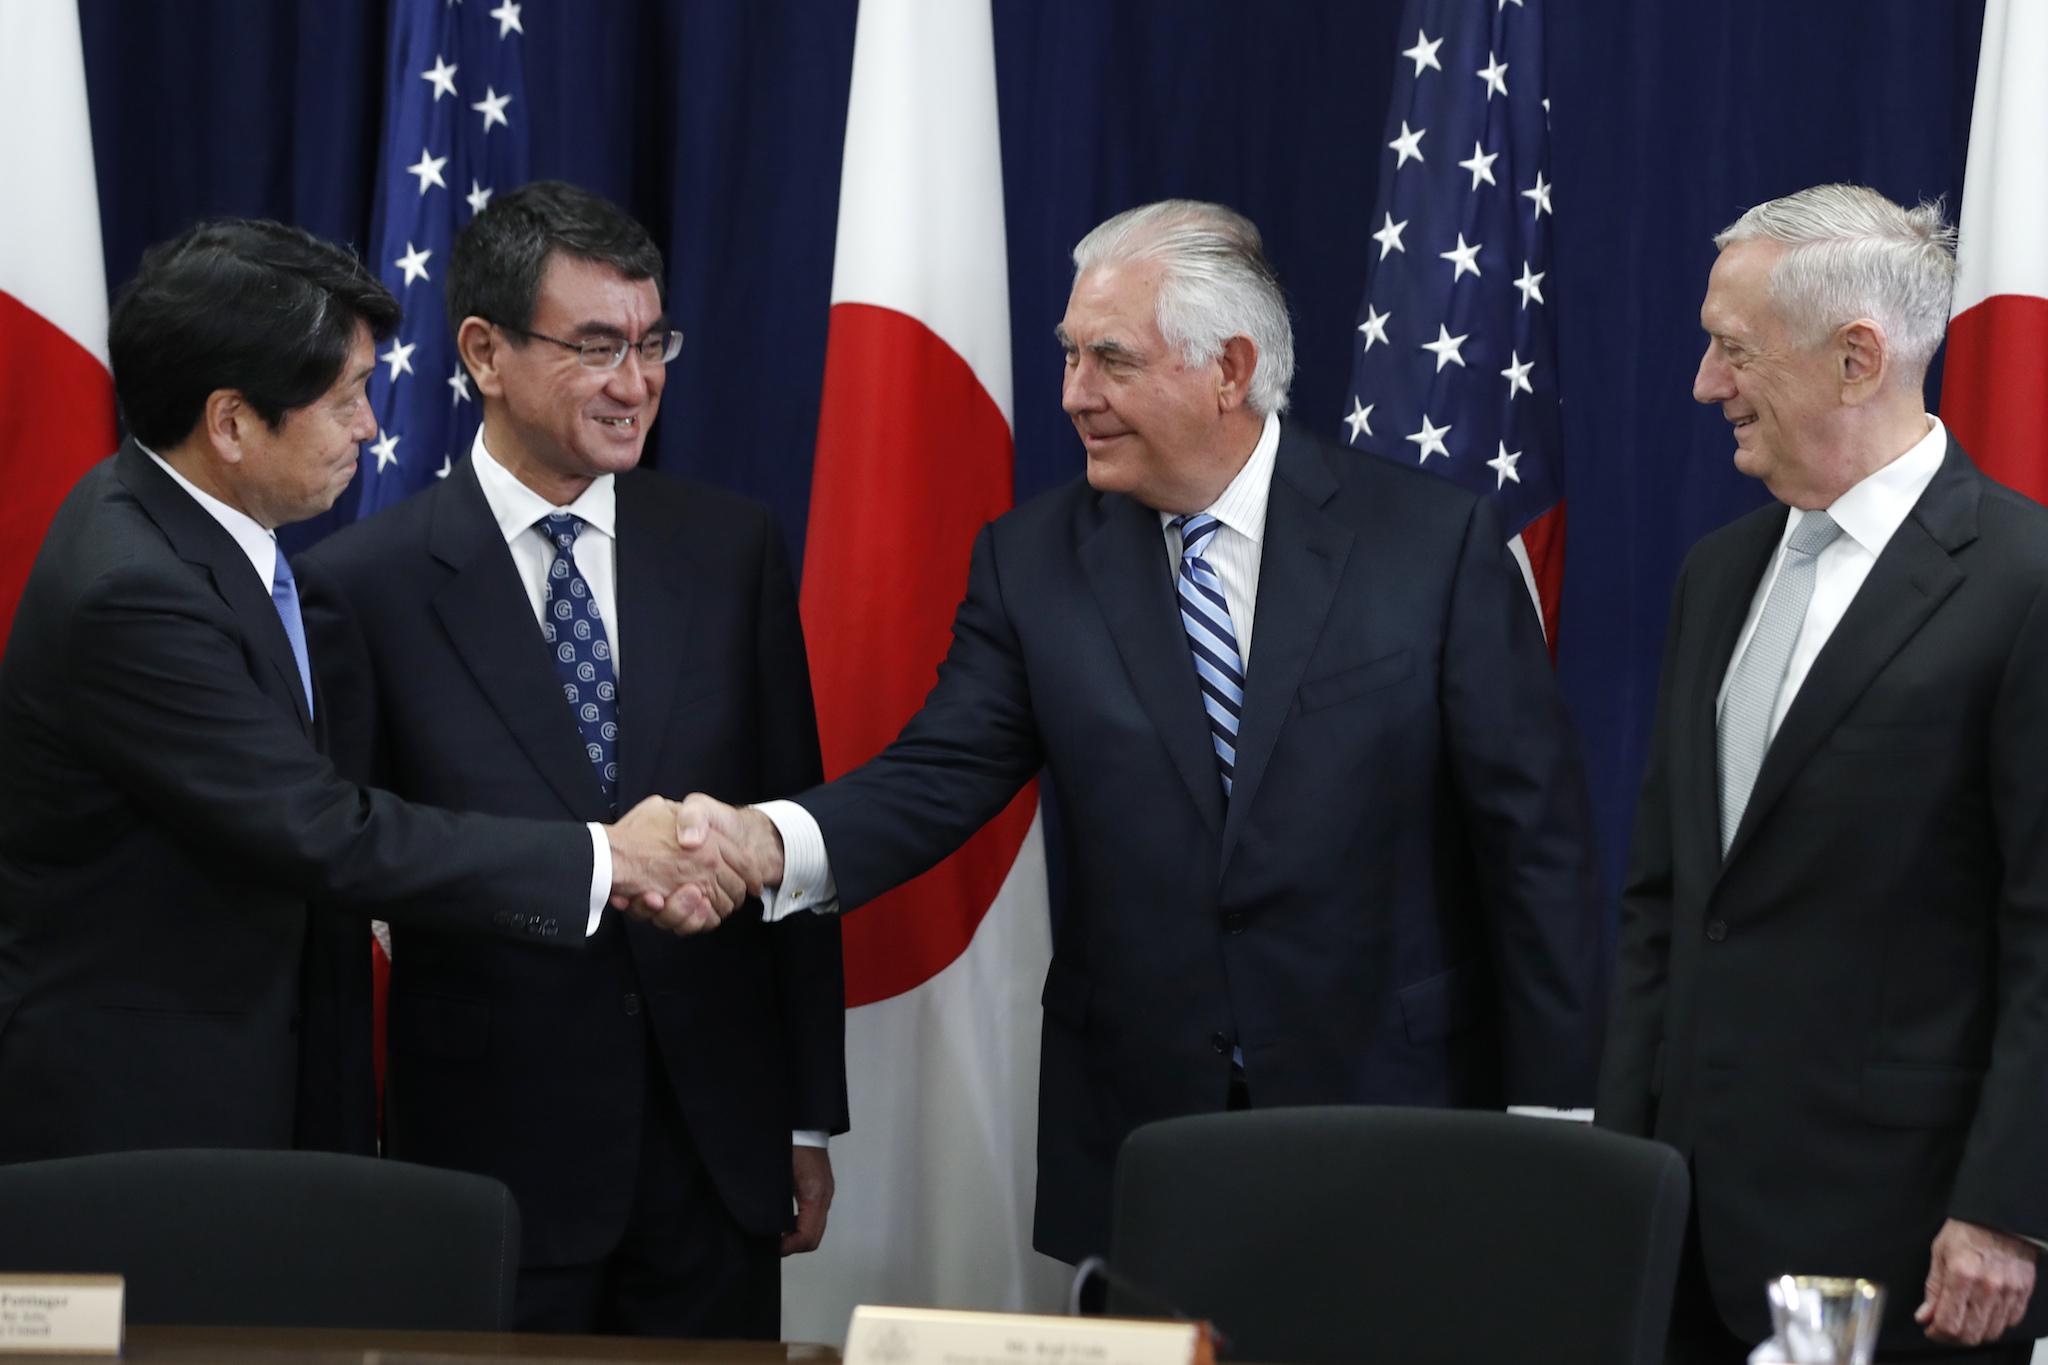 Japanese Defense Minister Itsunori Onodera, left, next to Japanese Foreign Minister Taro Kono, shakes hands with Secretary of State Rex Tillerson, next to Defense Secretary James Mattis